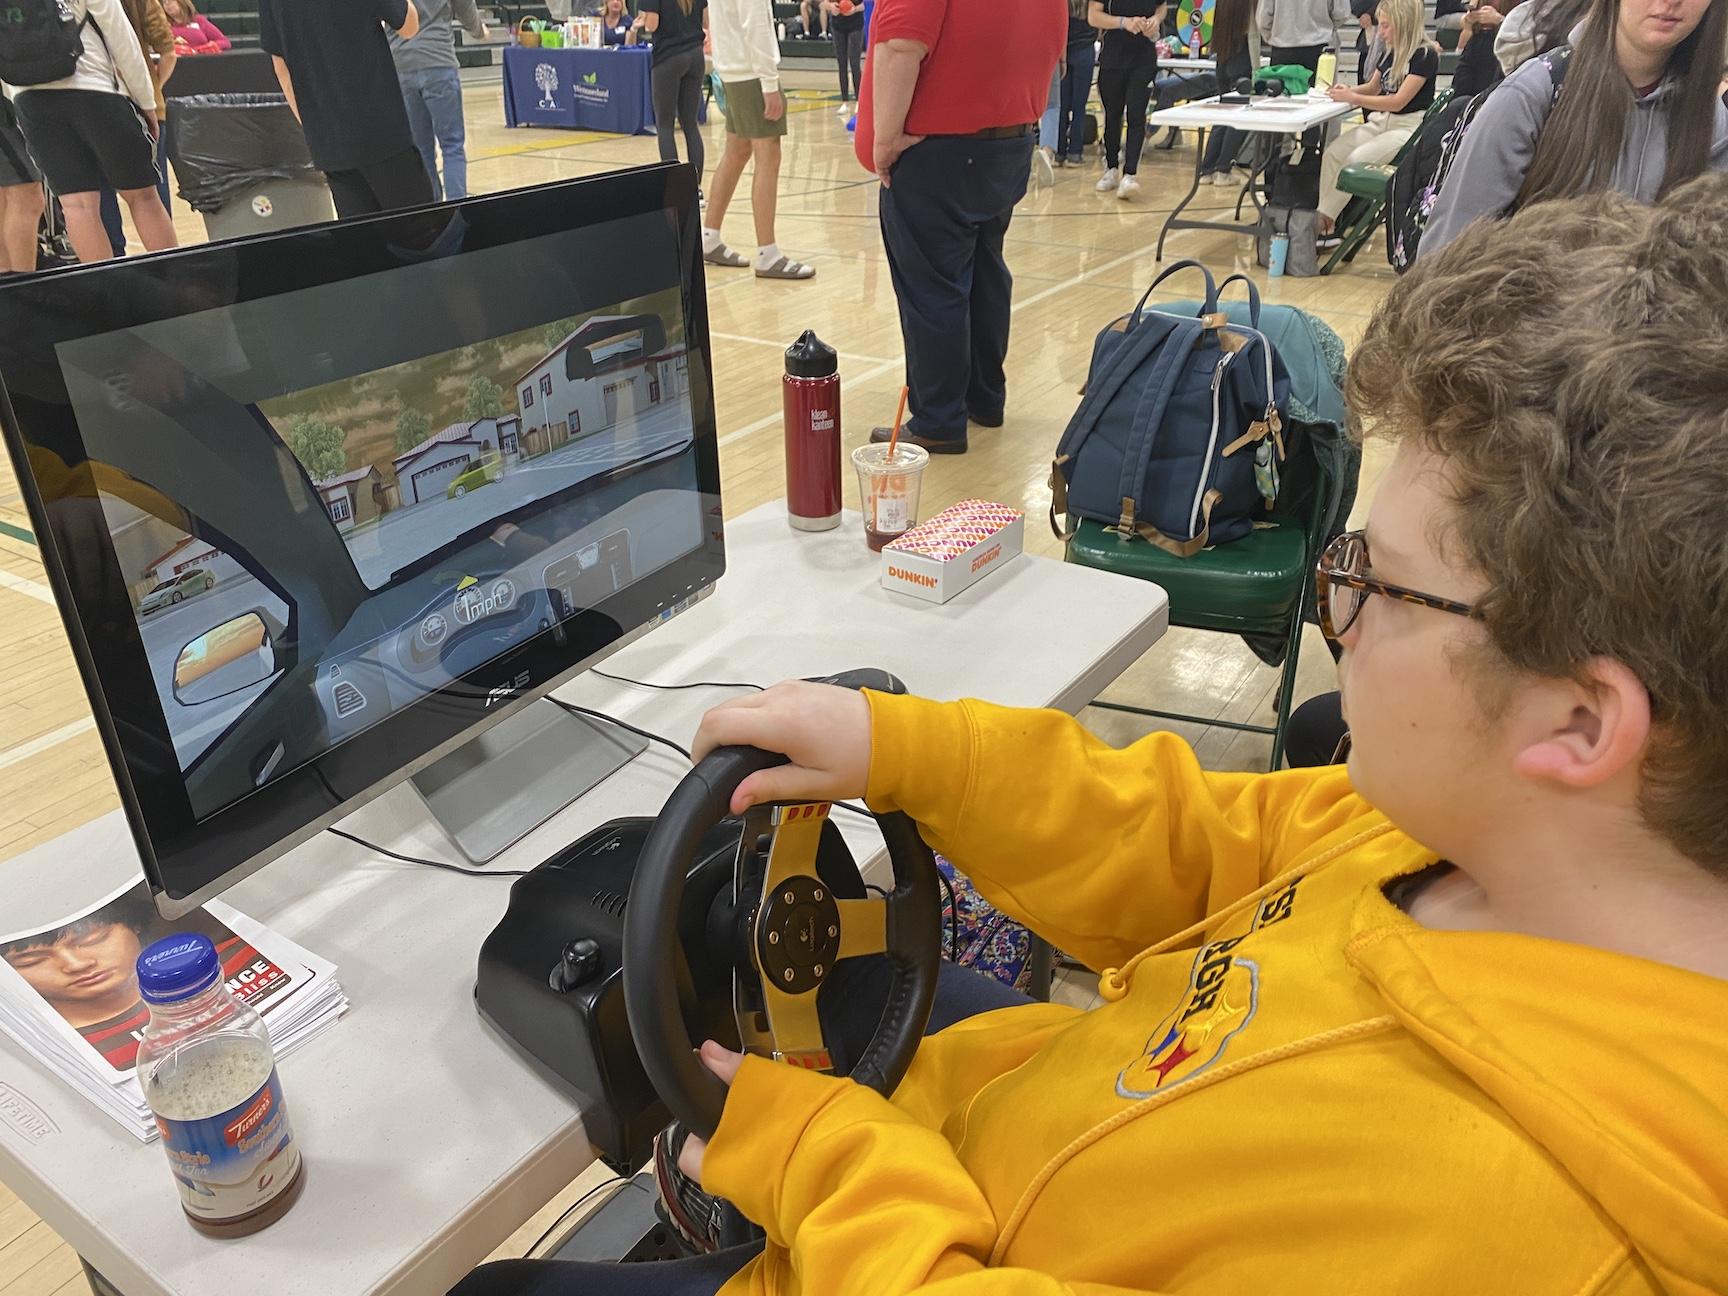 Zach Rebstock tries out the drunk driving simulator